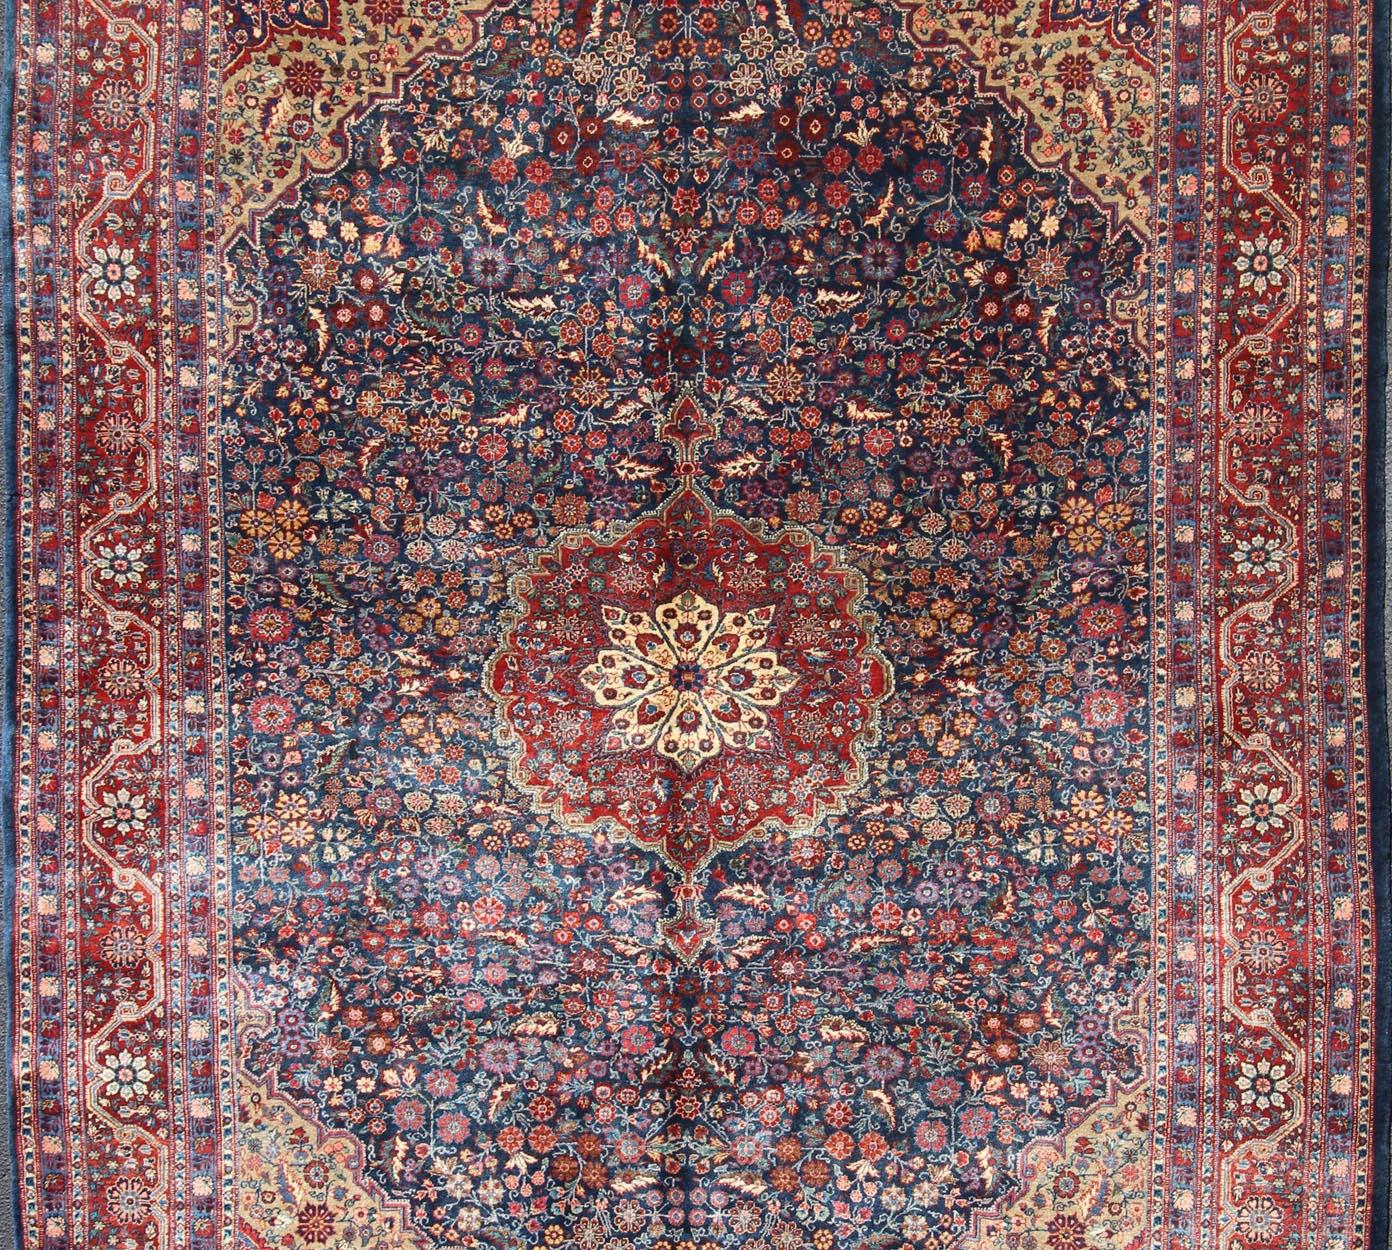 Persian Antique Tribal Medallion Josan Rug with Jewel Tones with Center Medallion For Sale